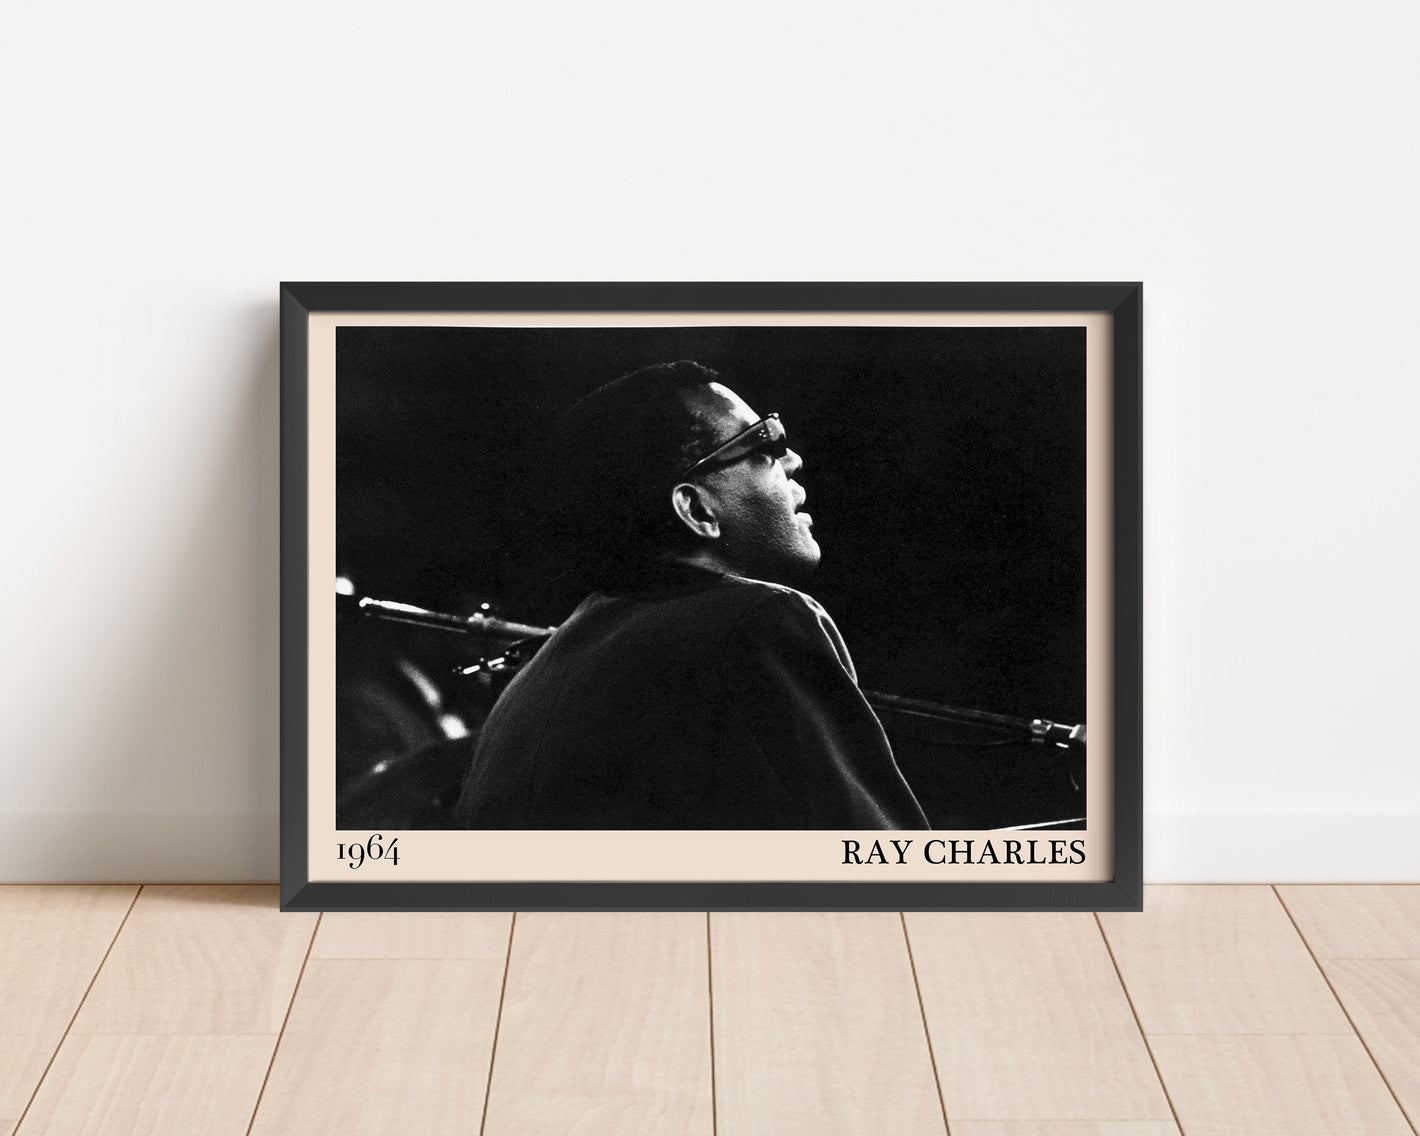  1964 photograph of blues legend Ray Charles, transformed into a stylish black-framed poster leaning on a white wall